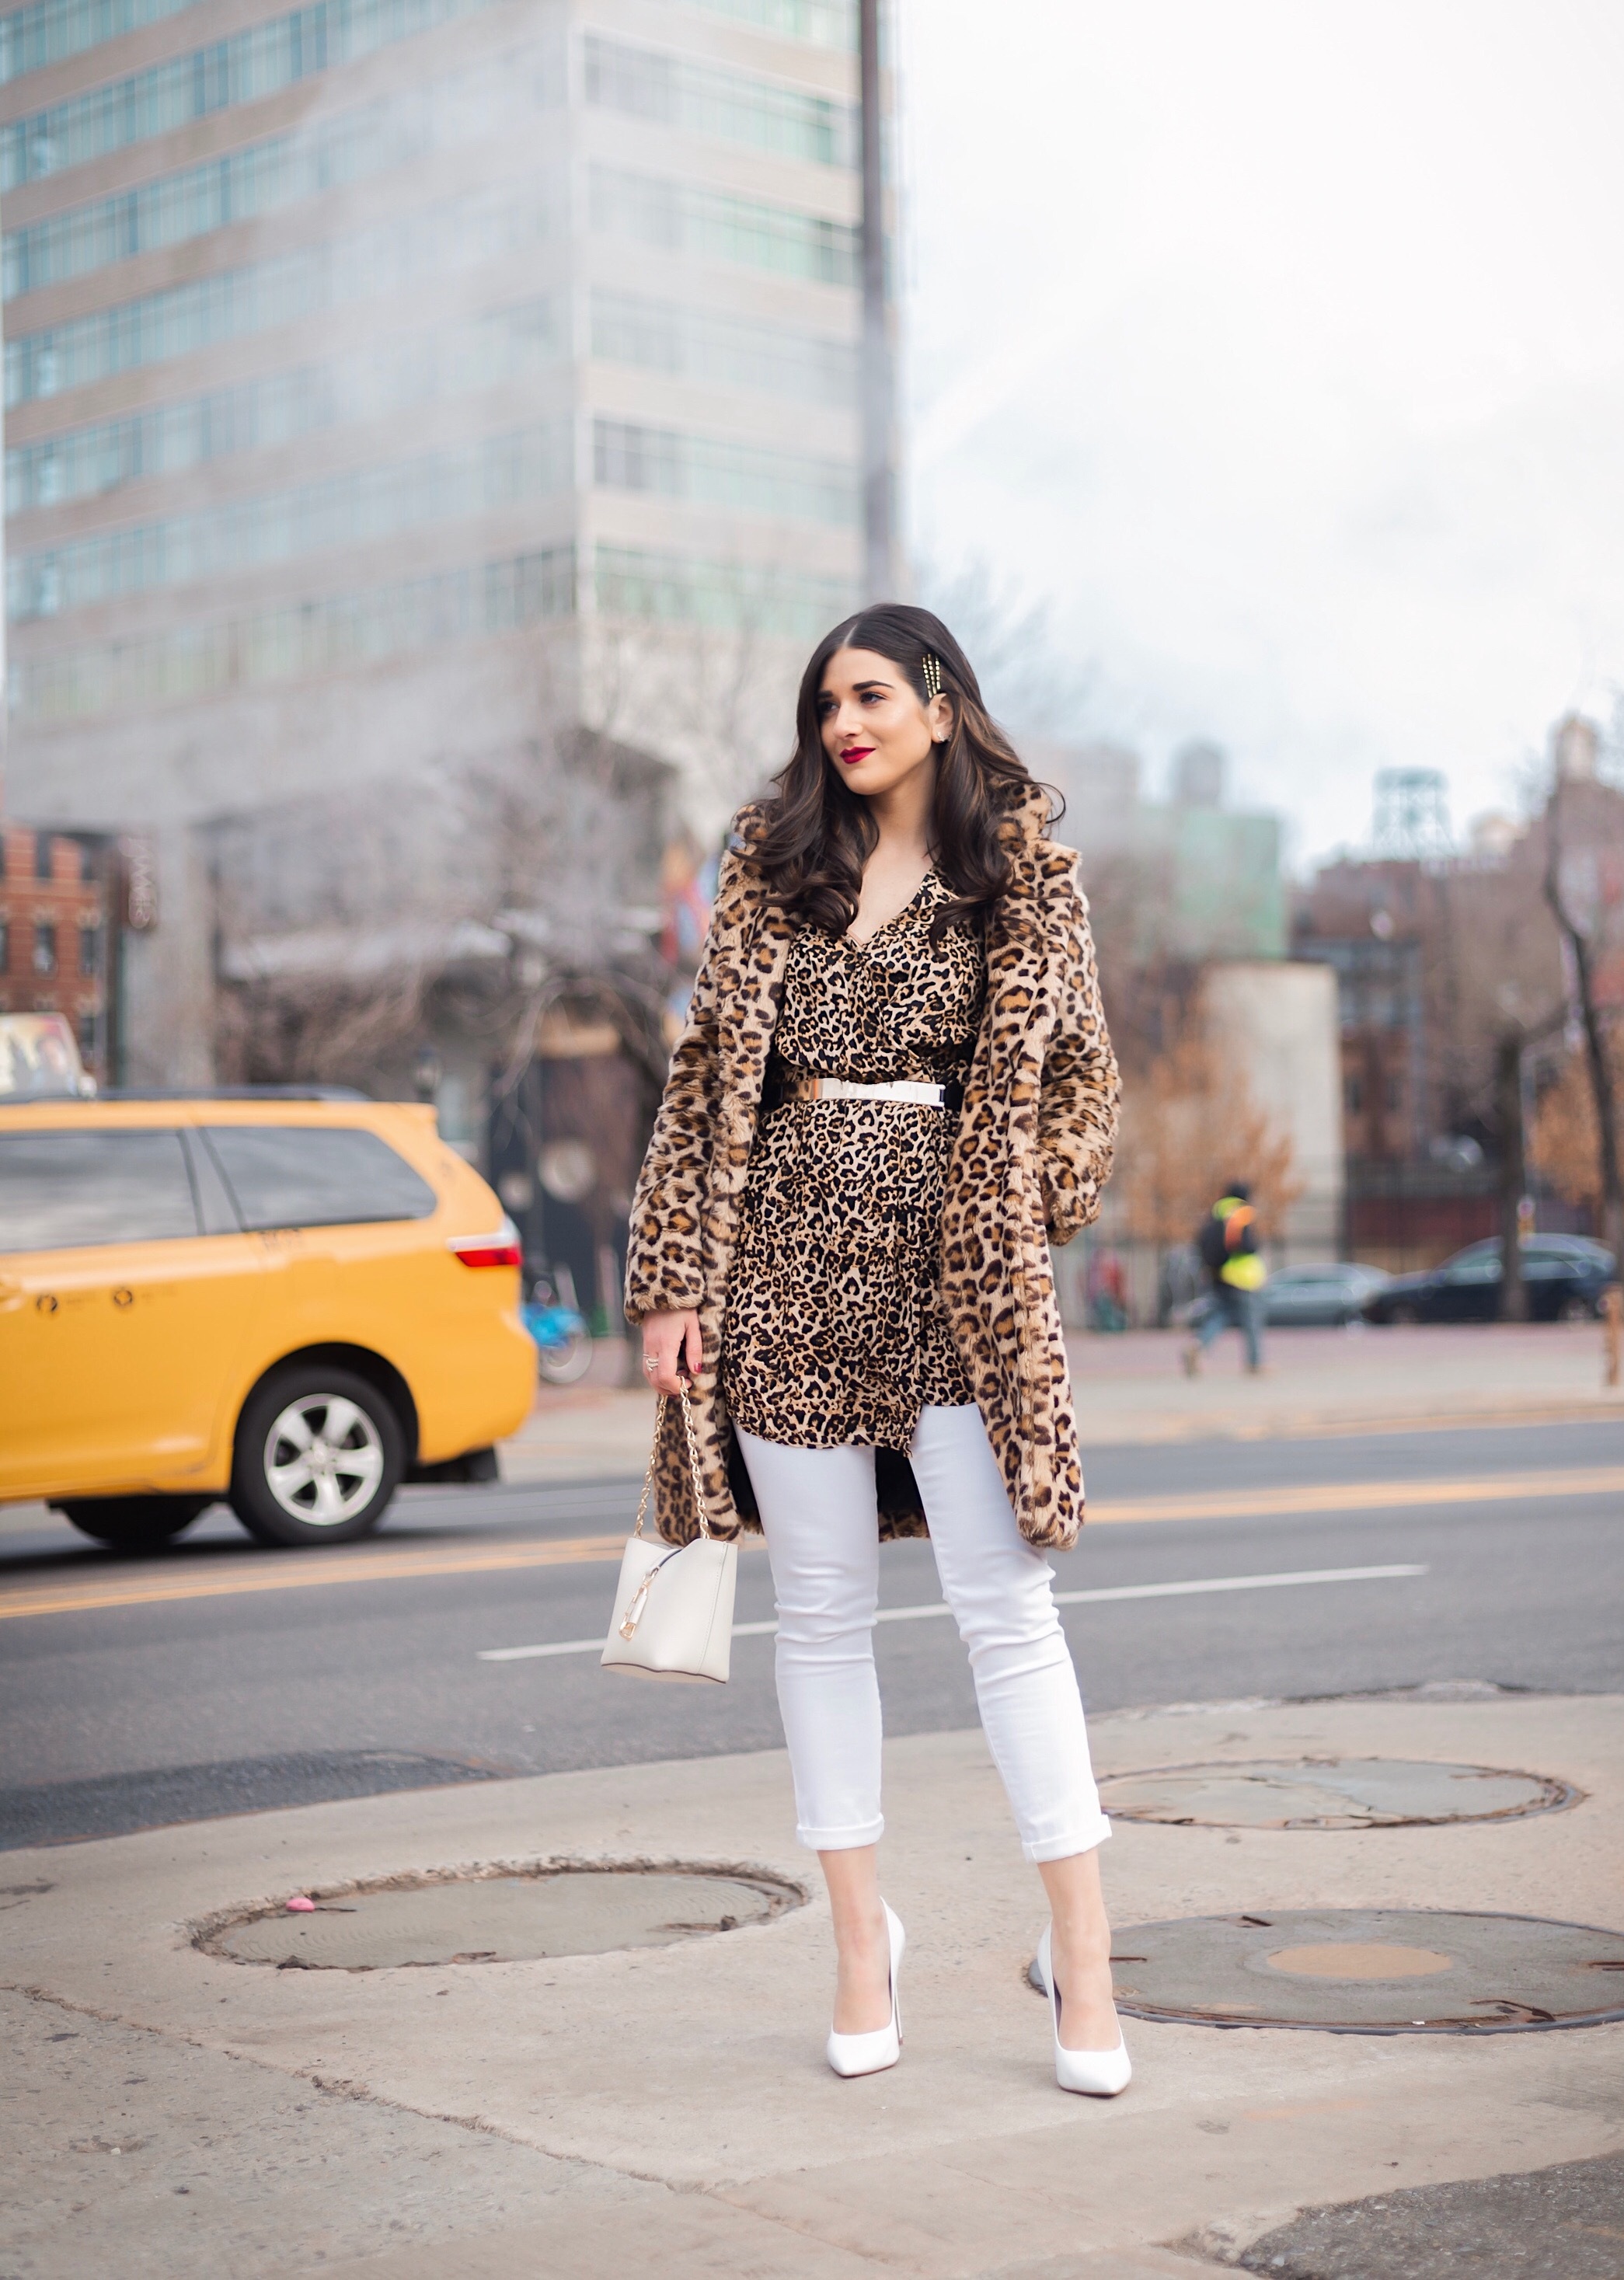 Dressing Up My Democracy Denim Esther Santer Fashion Blog NYC Street Style Blogger Outfit OOTD Trendy Shopping White Jeans Leopard Top Coat Inspo Bobby Pins Hair Trend White Heels Wear Chaya Ross Photography Inspiration Gold Belt Cream Chain Small Bag.jpg